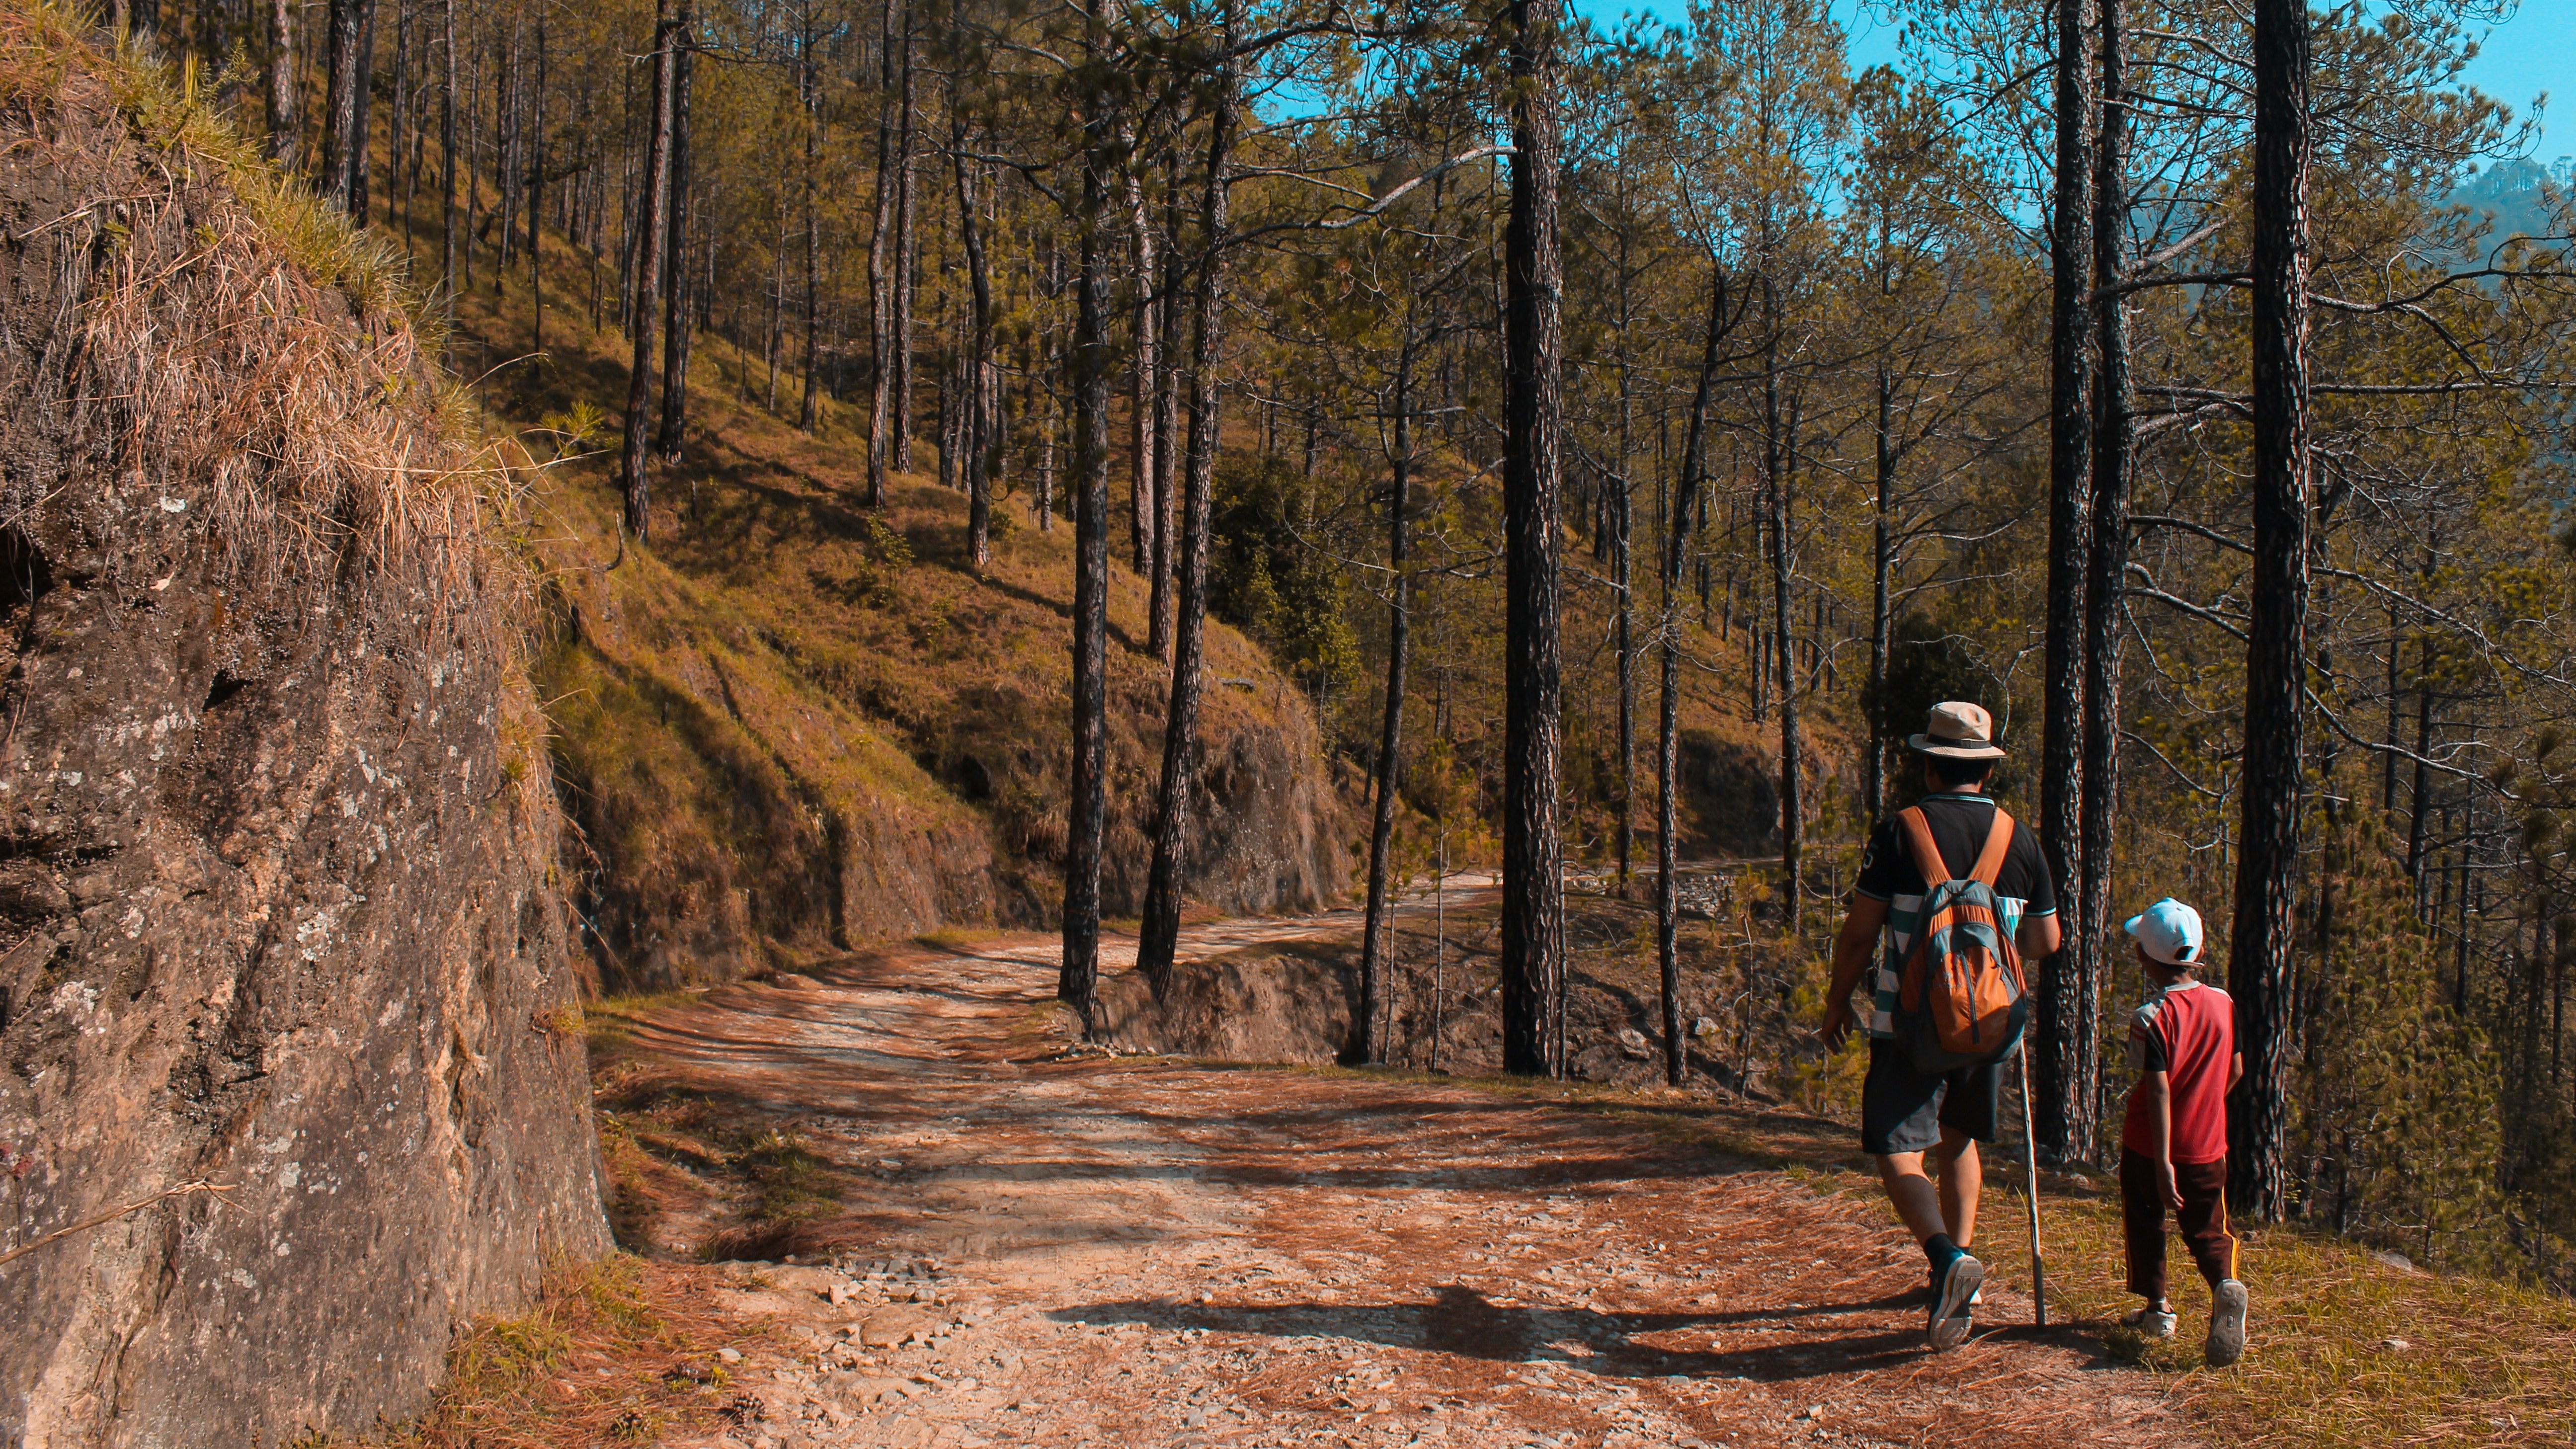 Justin and his dad hiked back to the campsite with the box.  | Photo: Pexels